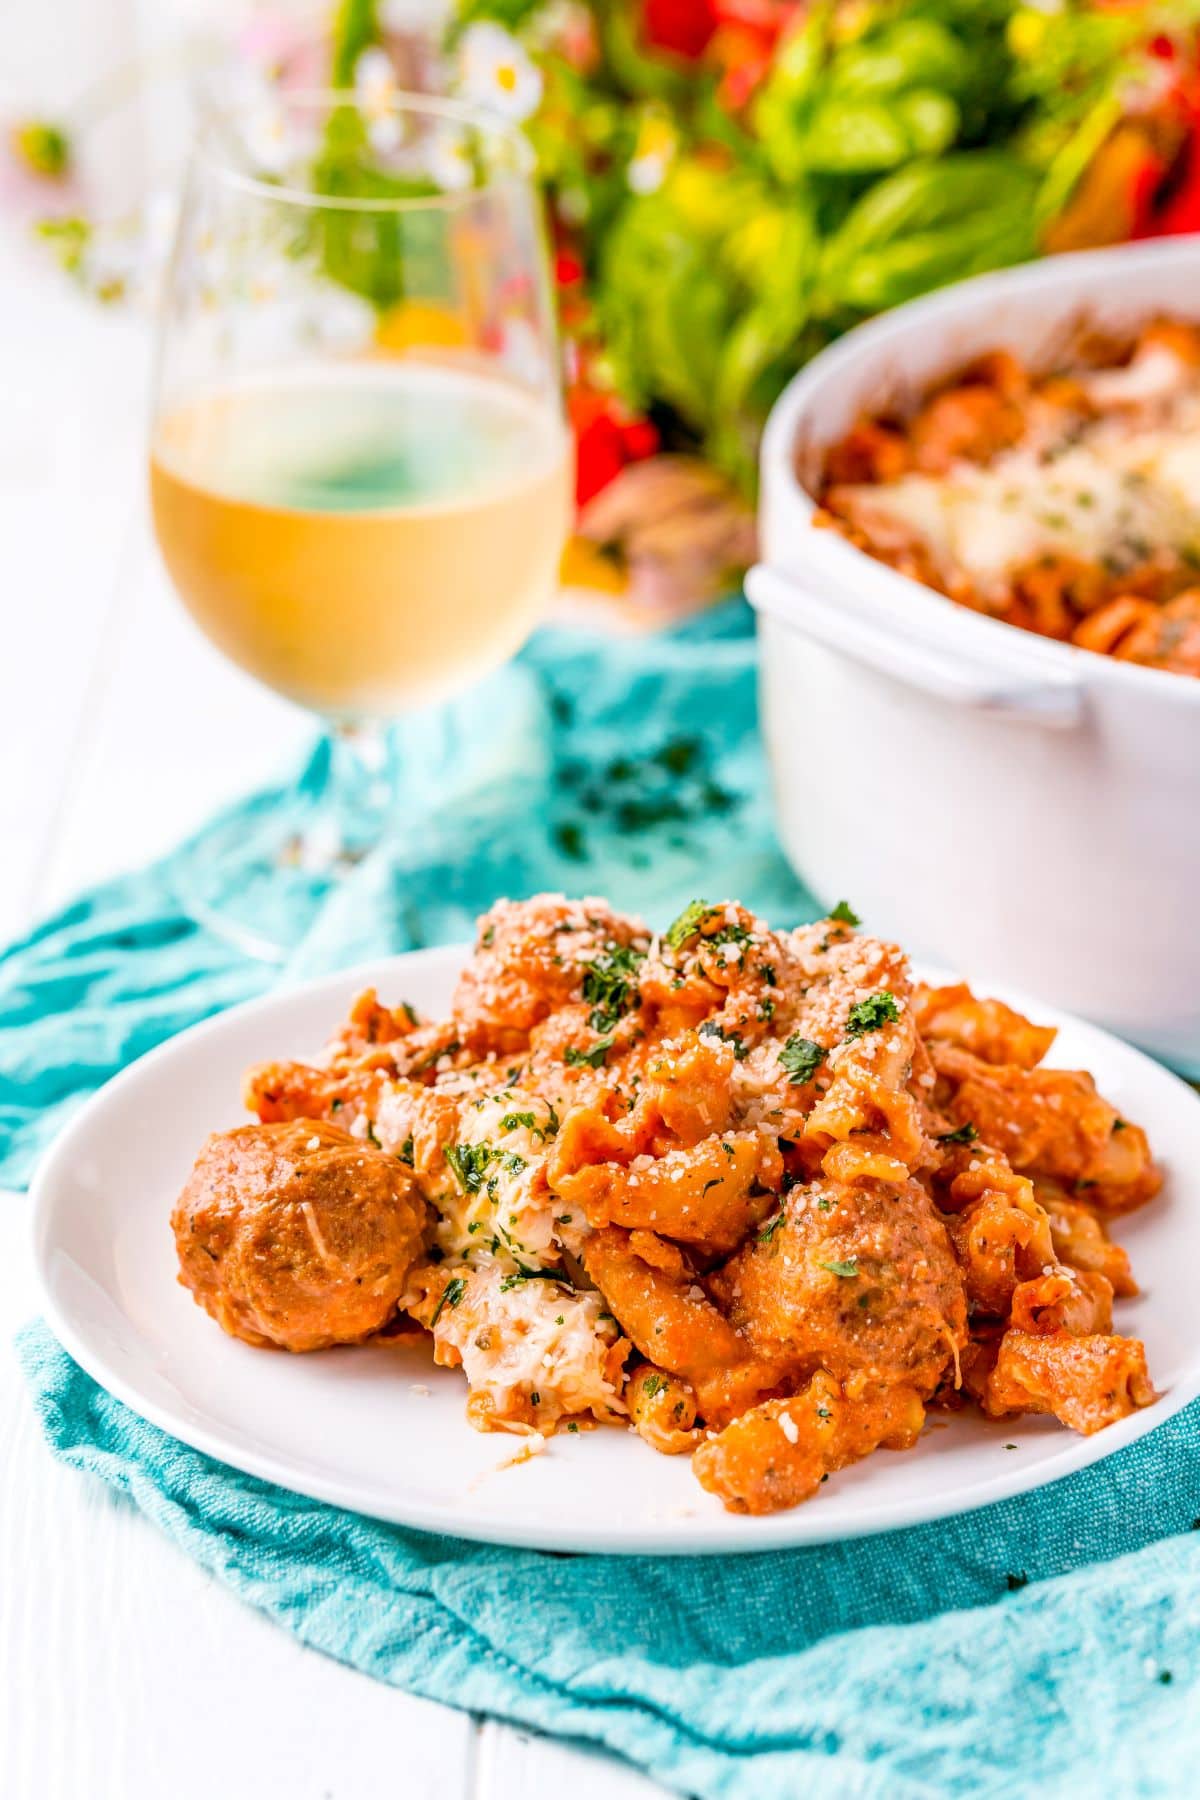 Meatball Pasta Bake on  plate with a glass of wine in the background